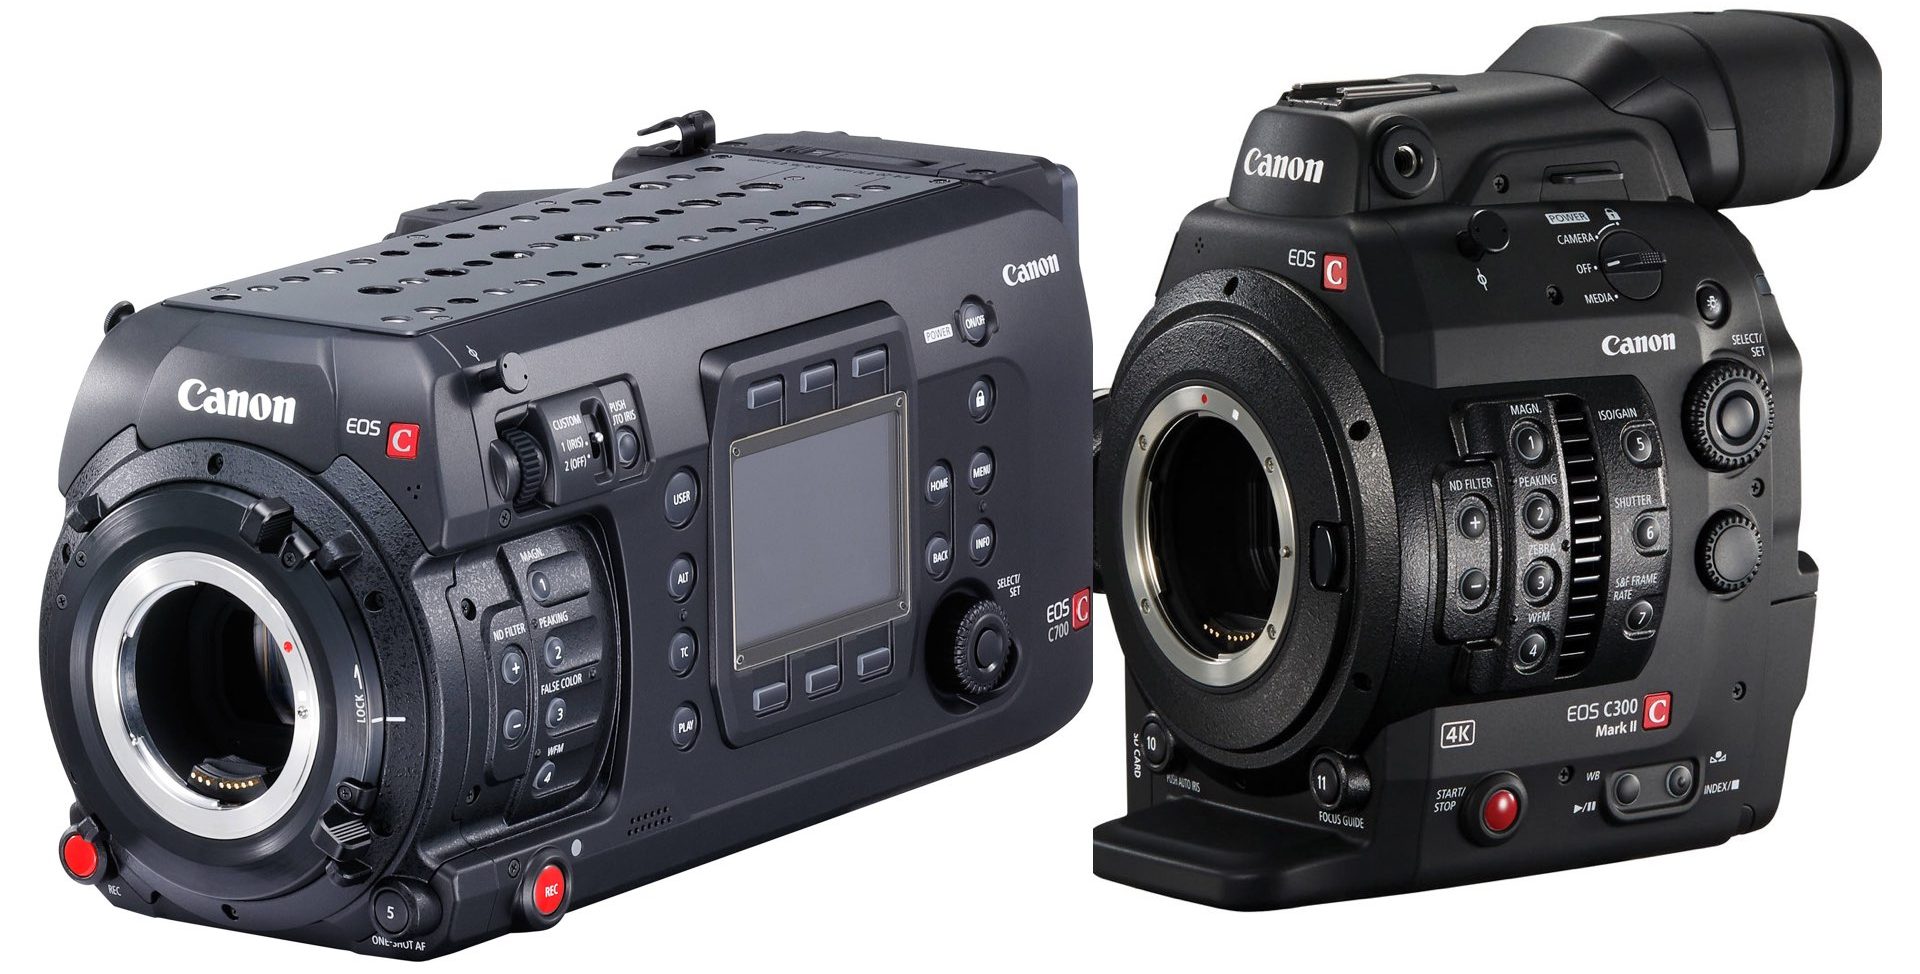 Canon's flagship C700 and the C300